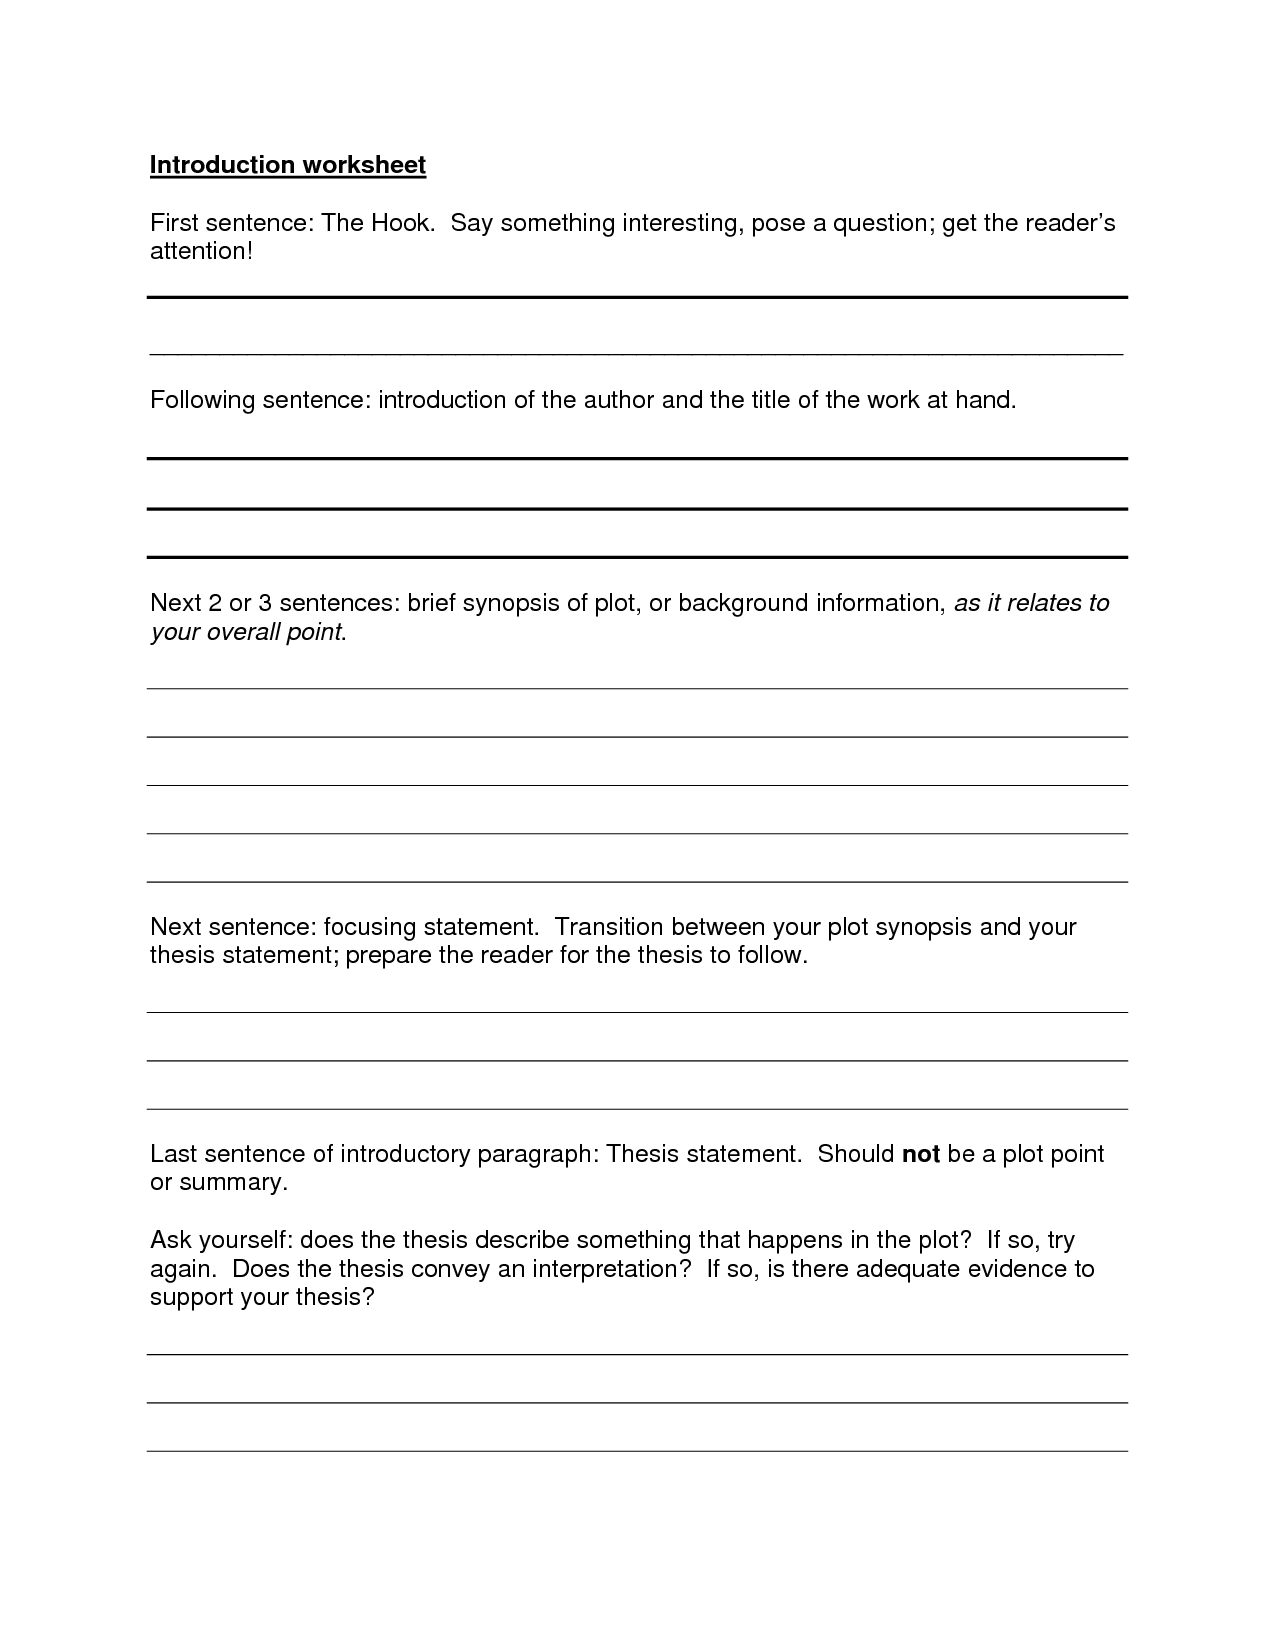 11-best-images-of-introduction-paragraph-worksheet-essay-writing-worksheets-five-paragraph